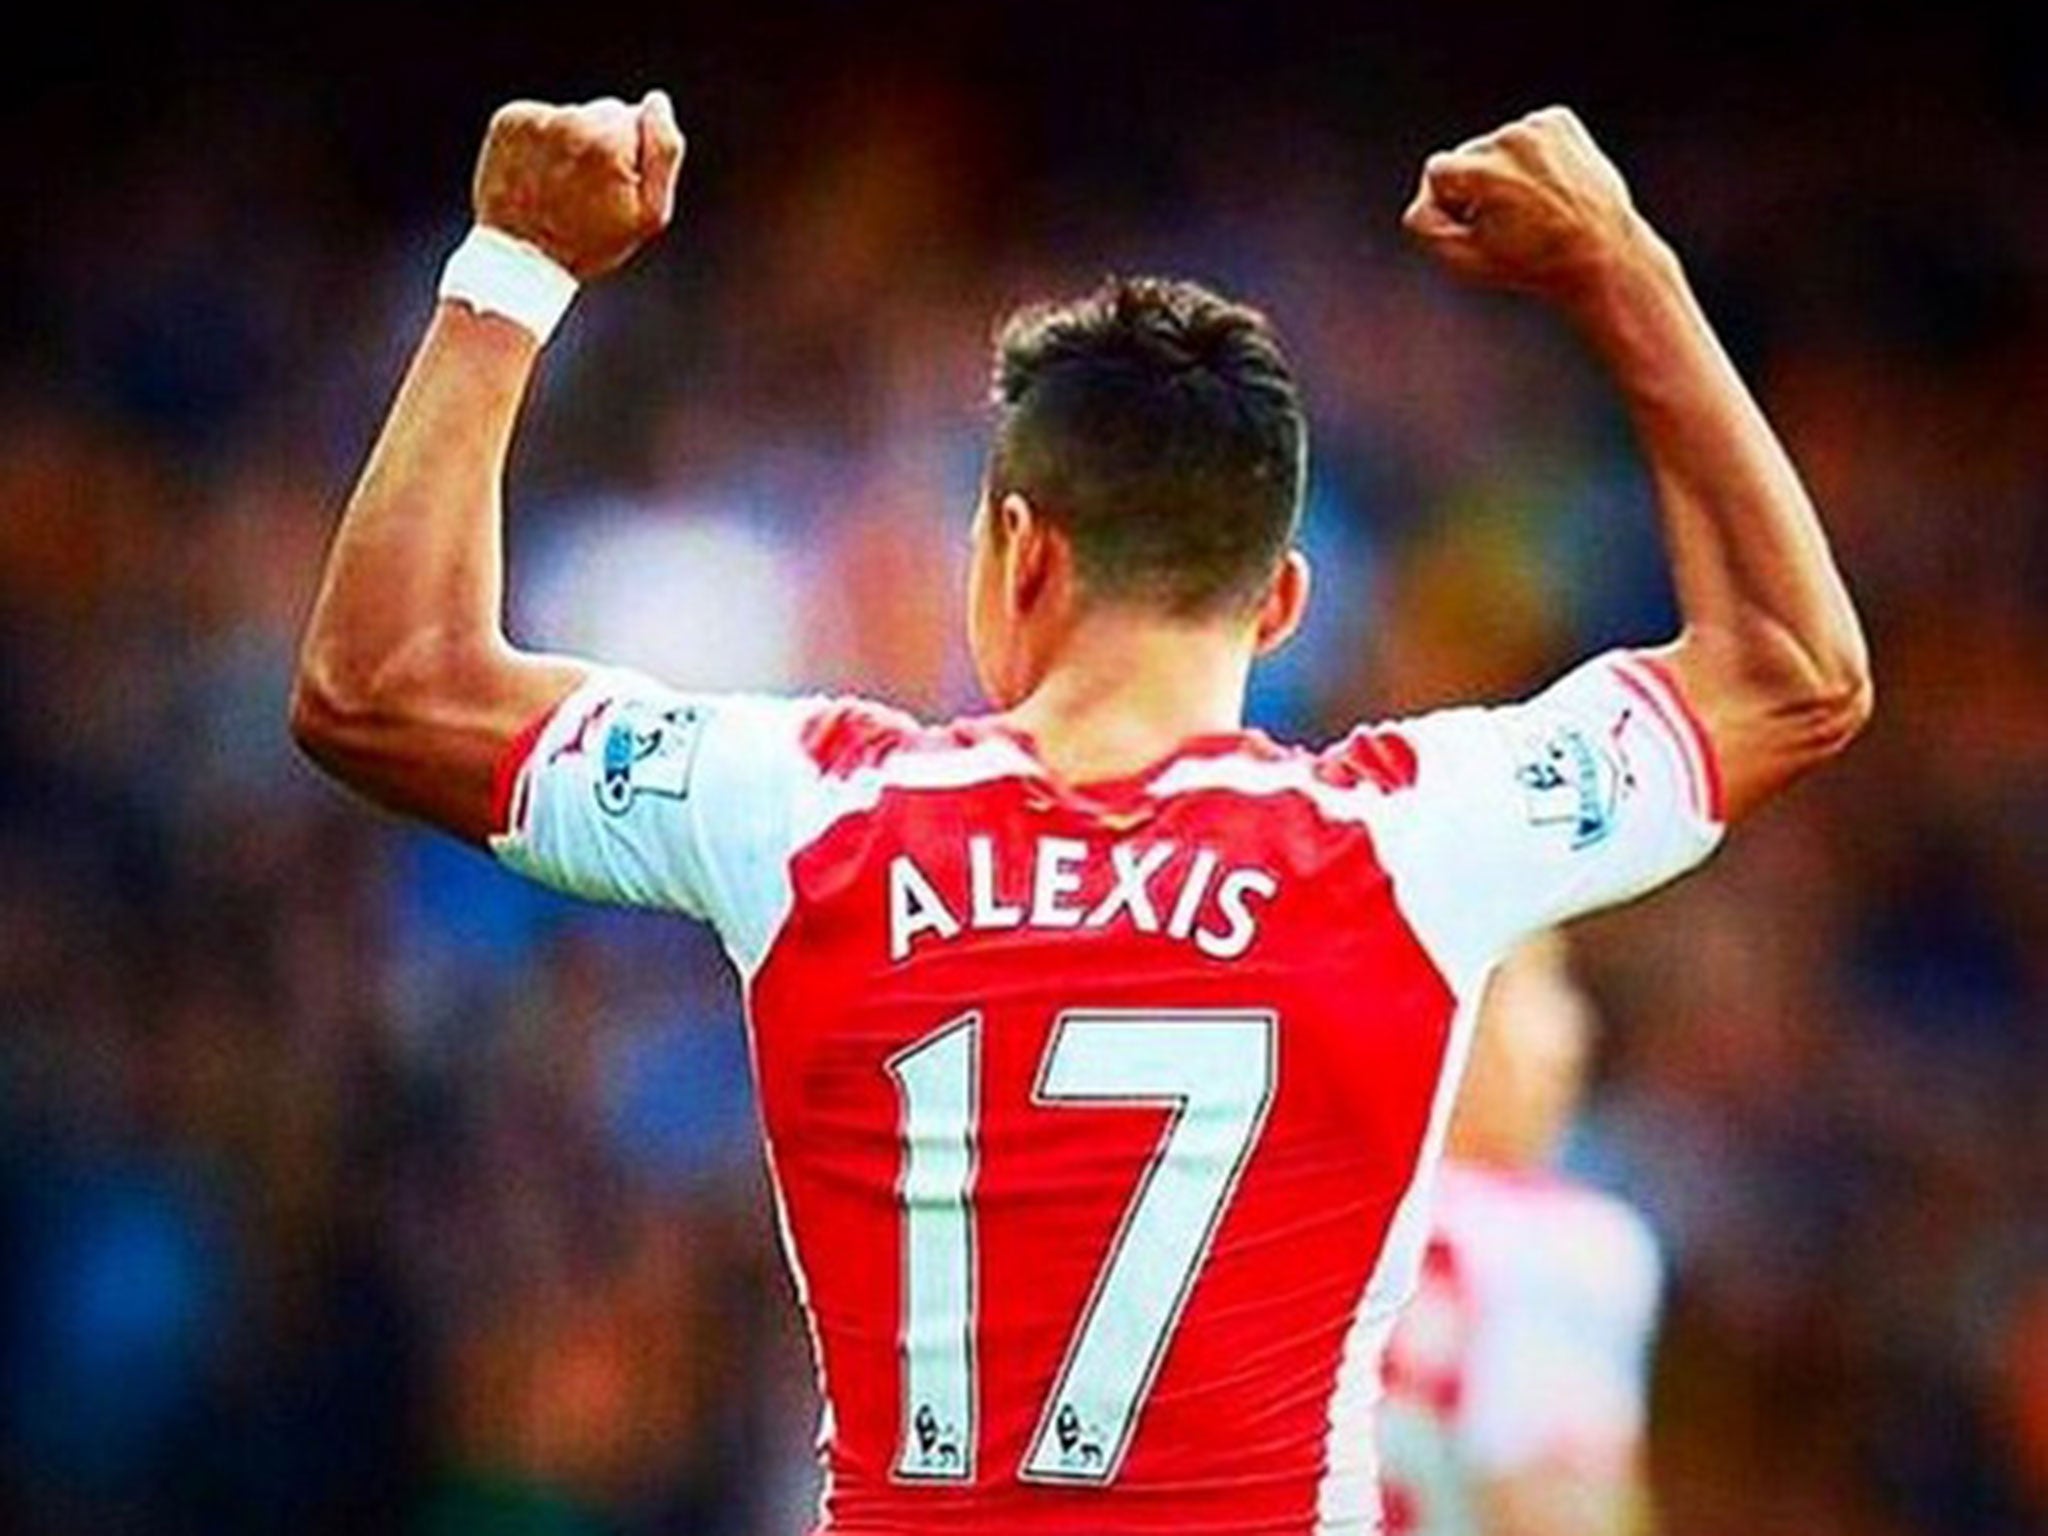 Alexis Sanchez posted this picture on Twitter today